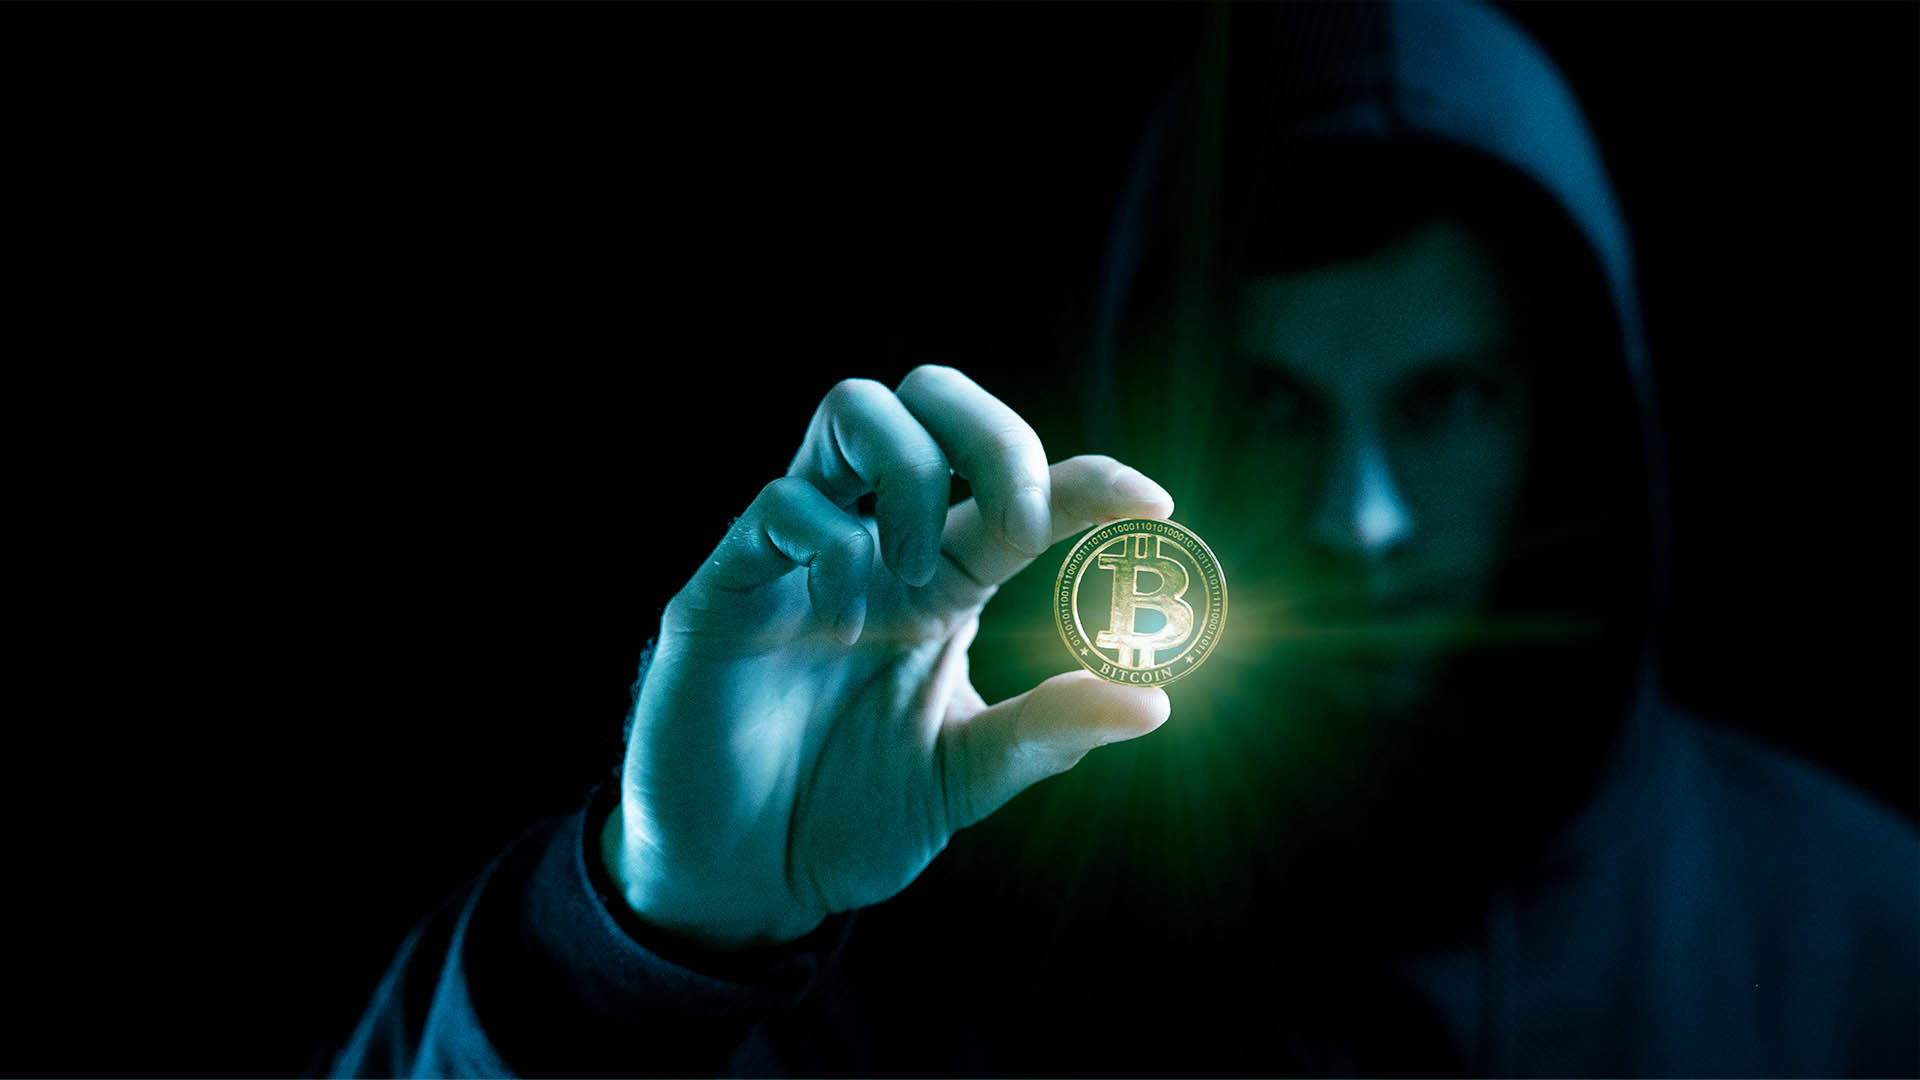 The flip side of the coin: Why crypto is catnip for criminals | WeLiveSecurity